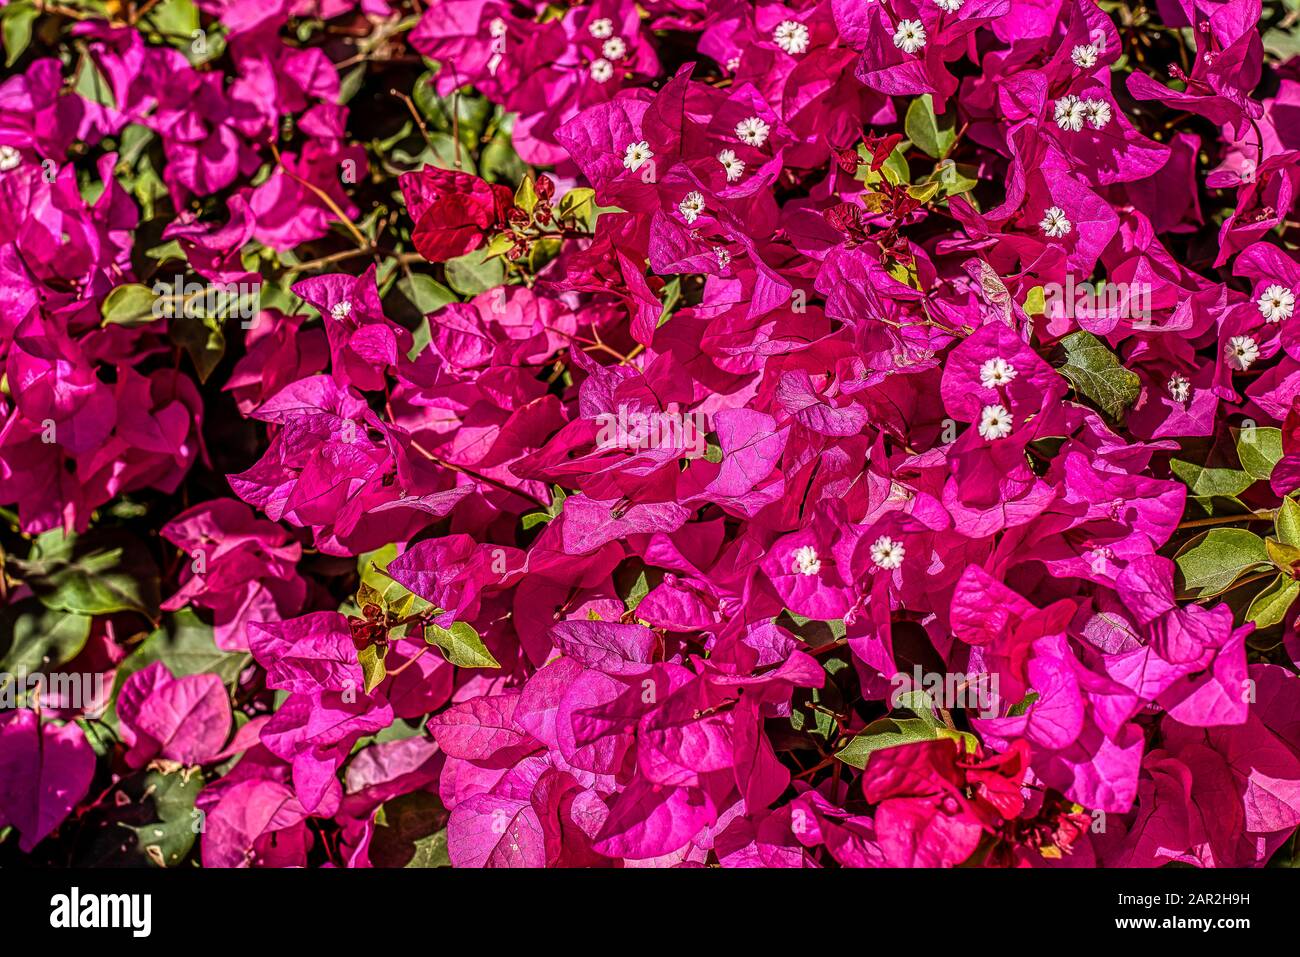 pink azaleas blooming in a clourful background texture, Egypt, January 12, 2020 Stock Photo